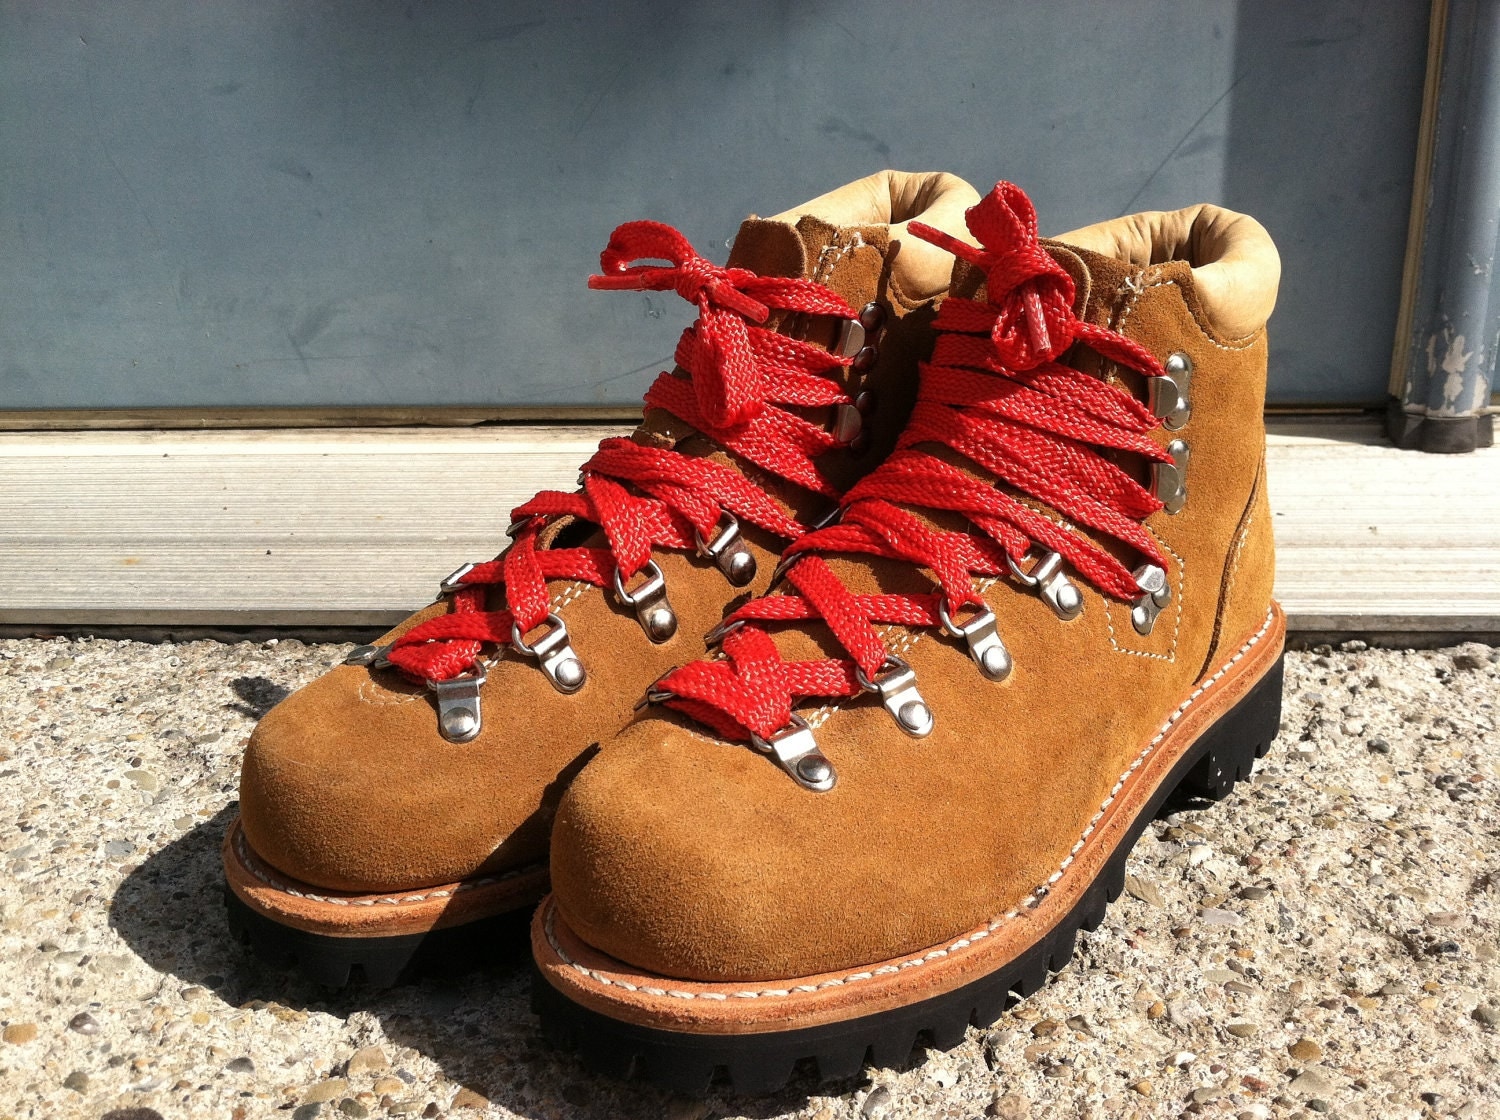 Original 70s Suede Red Lace Hiking Boots sz 7